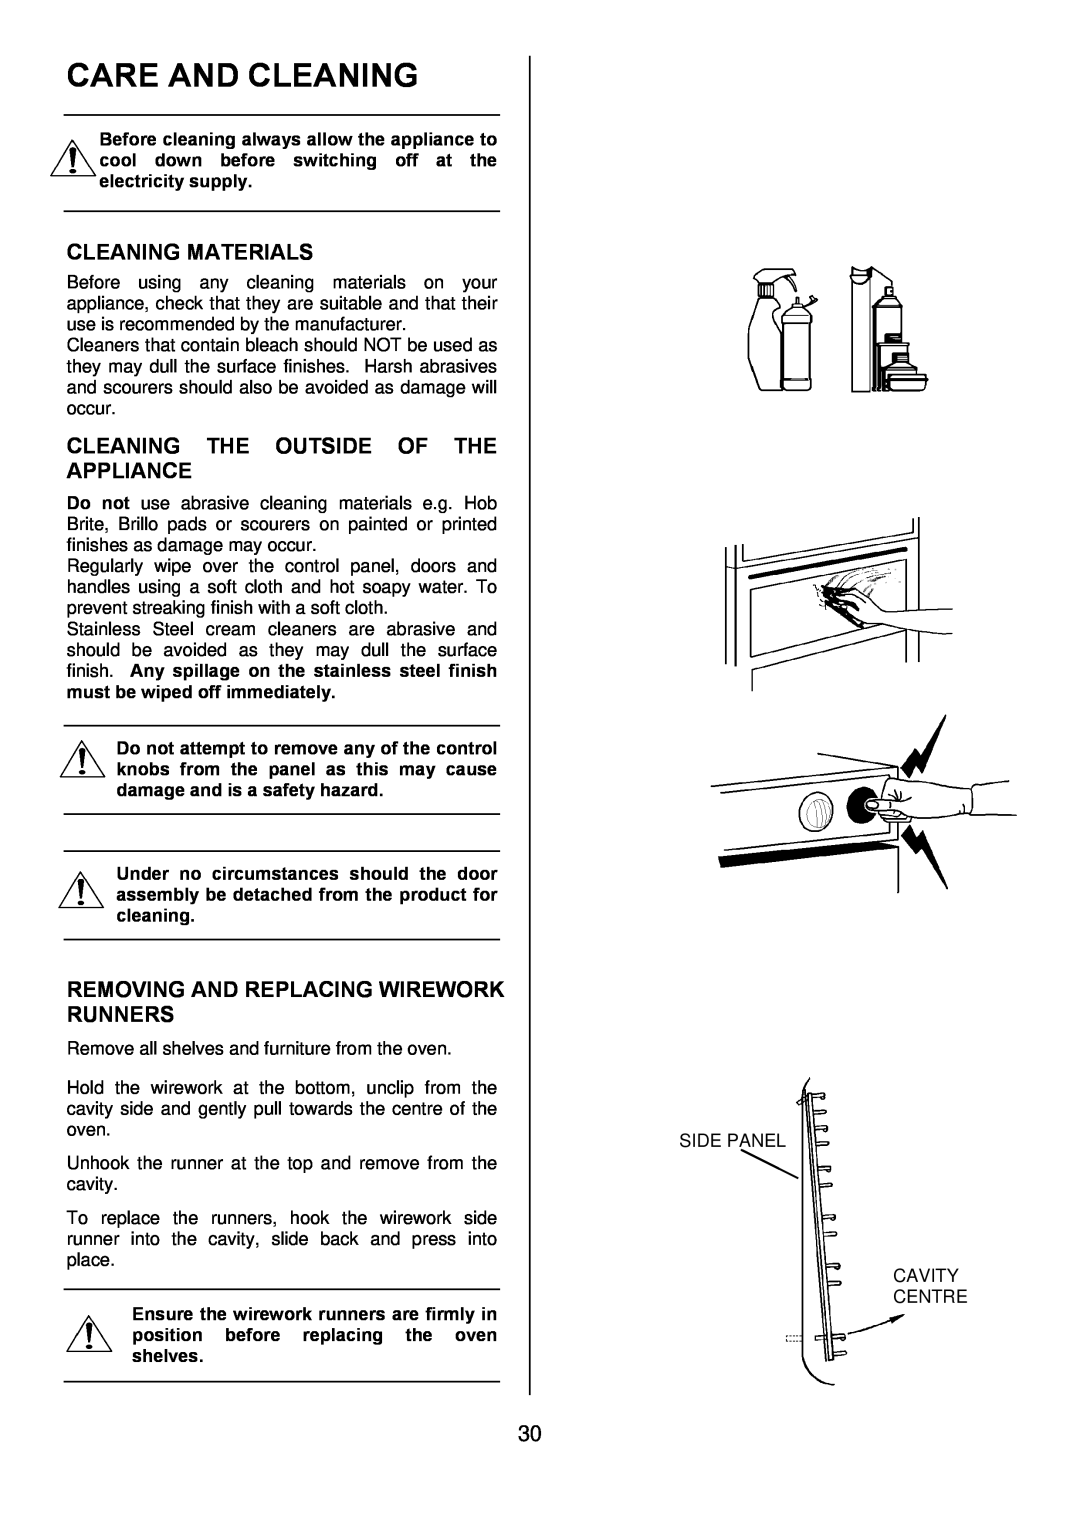 Electrolux D4101-5 manual Care And Cleaning, Cleaning Materials, Cleaning The Outside Of The Appliance 